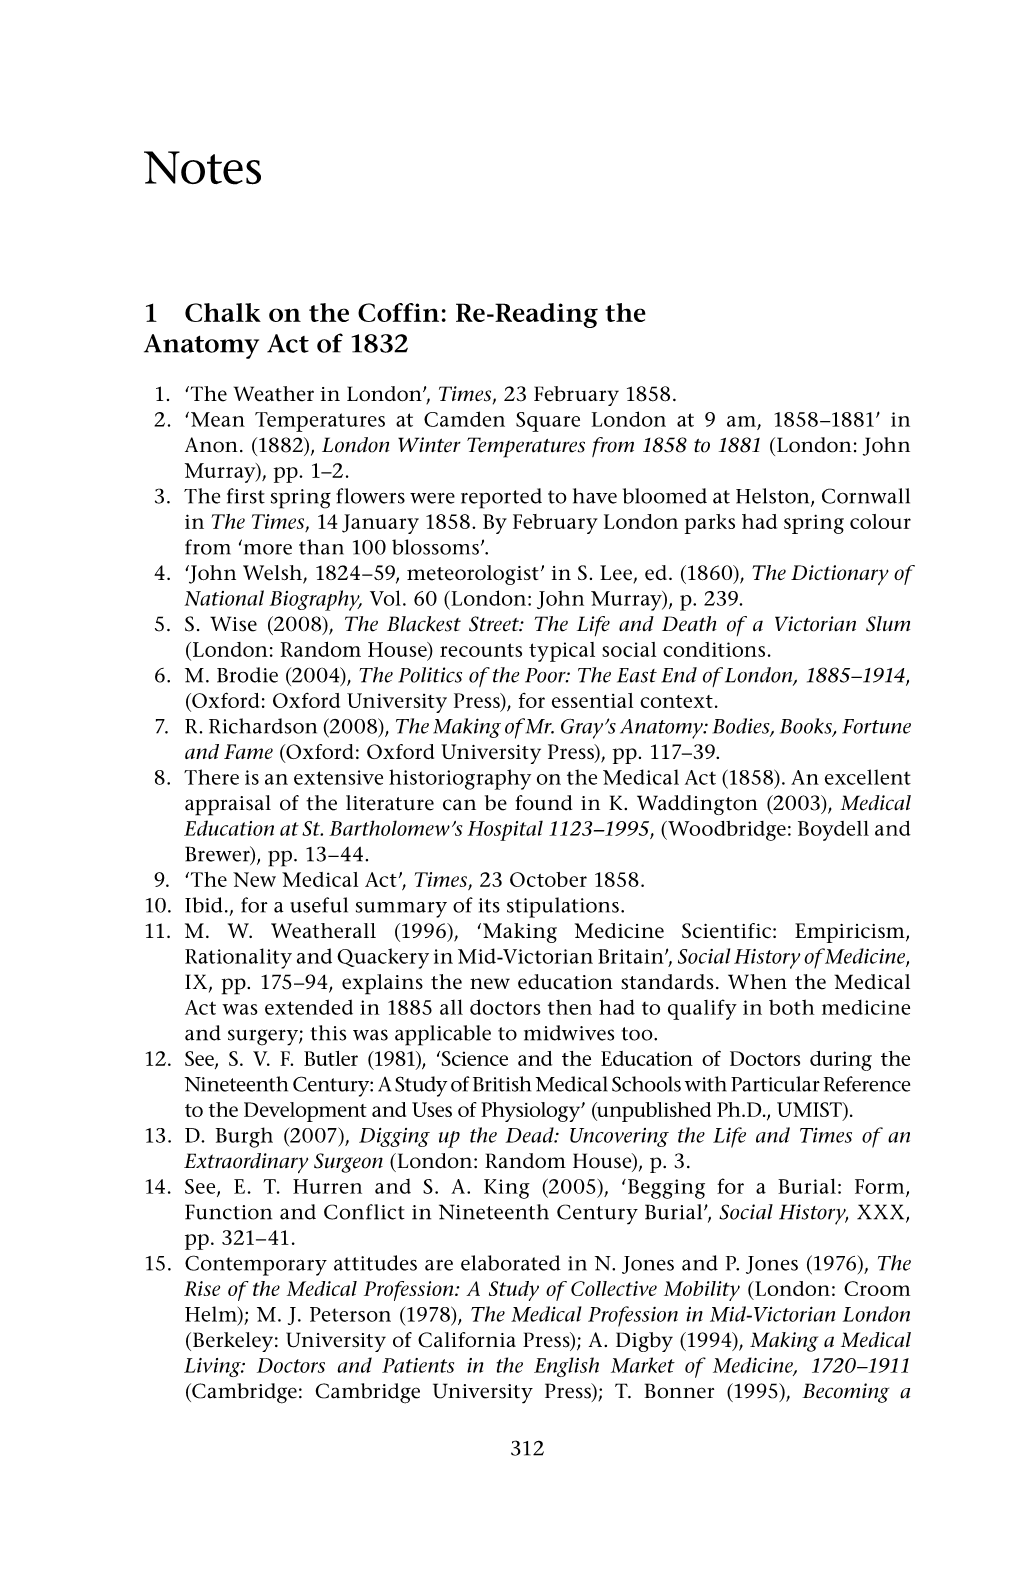 1 Chalk on the Coffin: Re-Reading the Anatomy Act of 1832